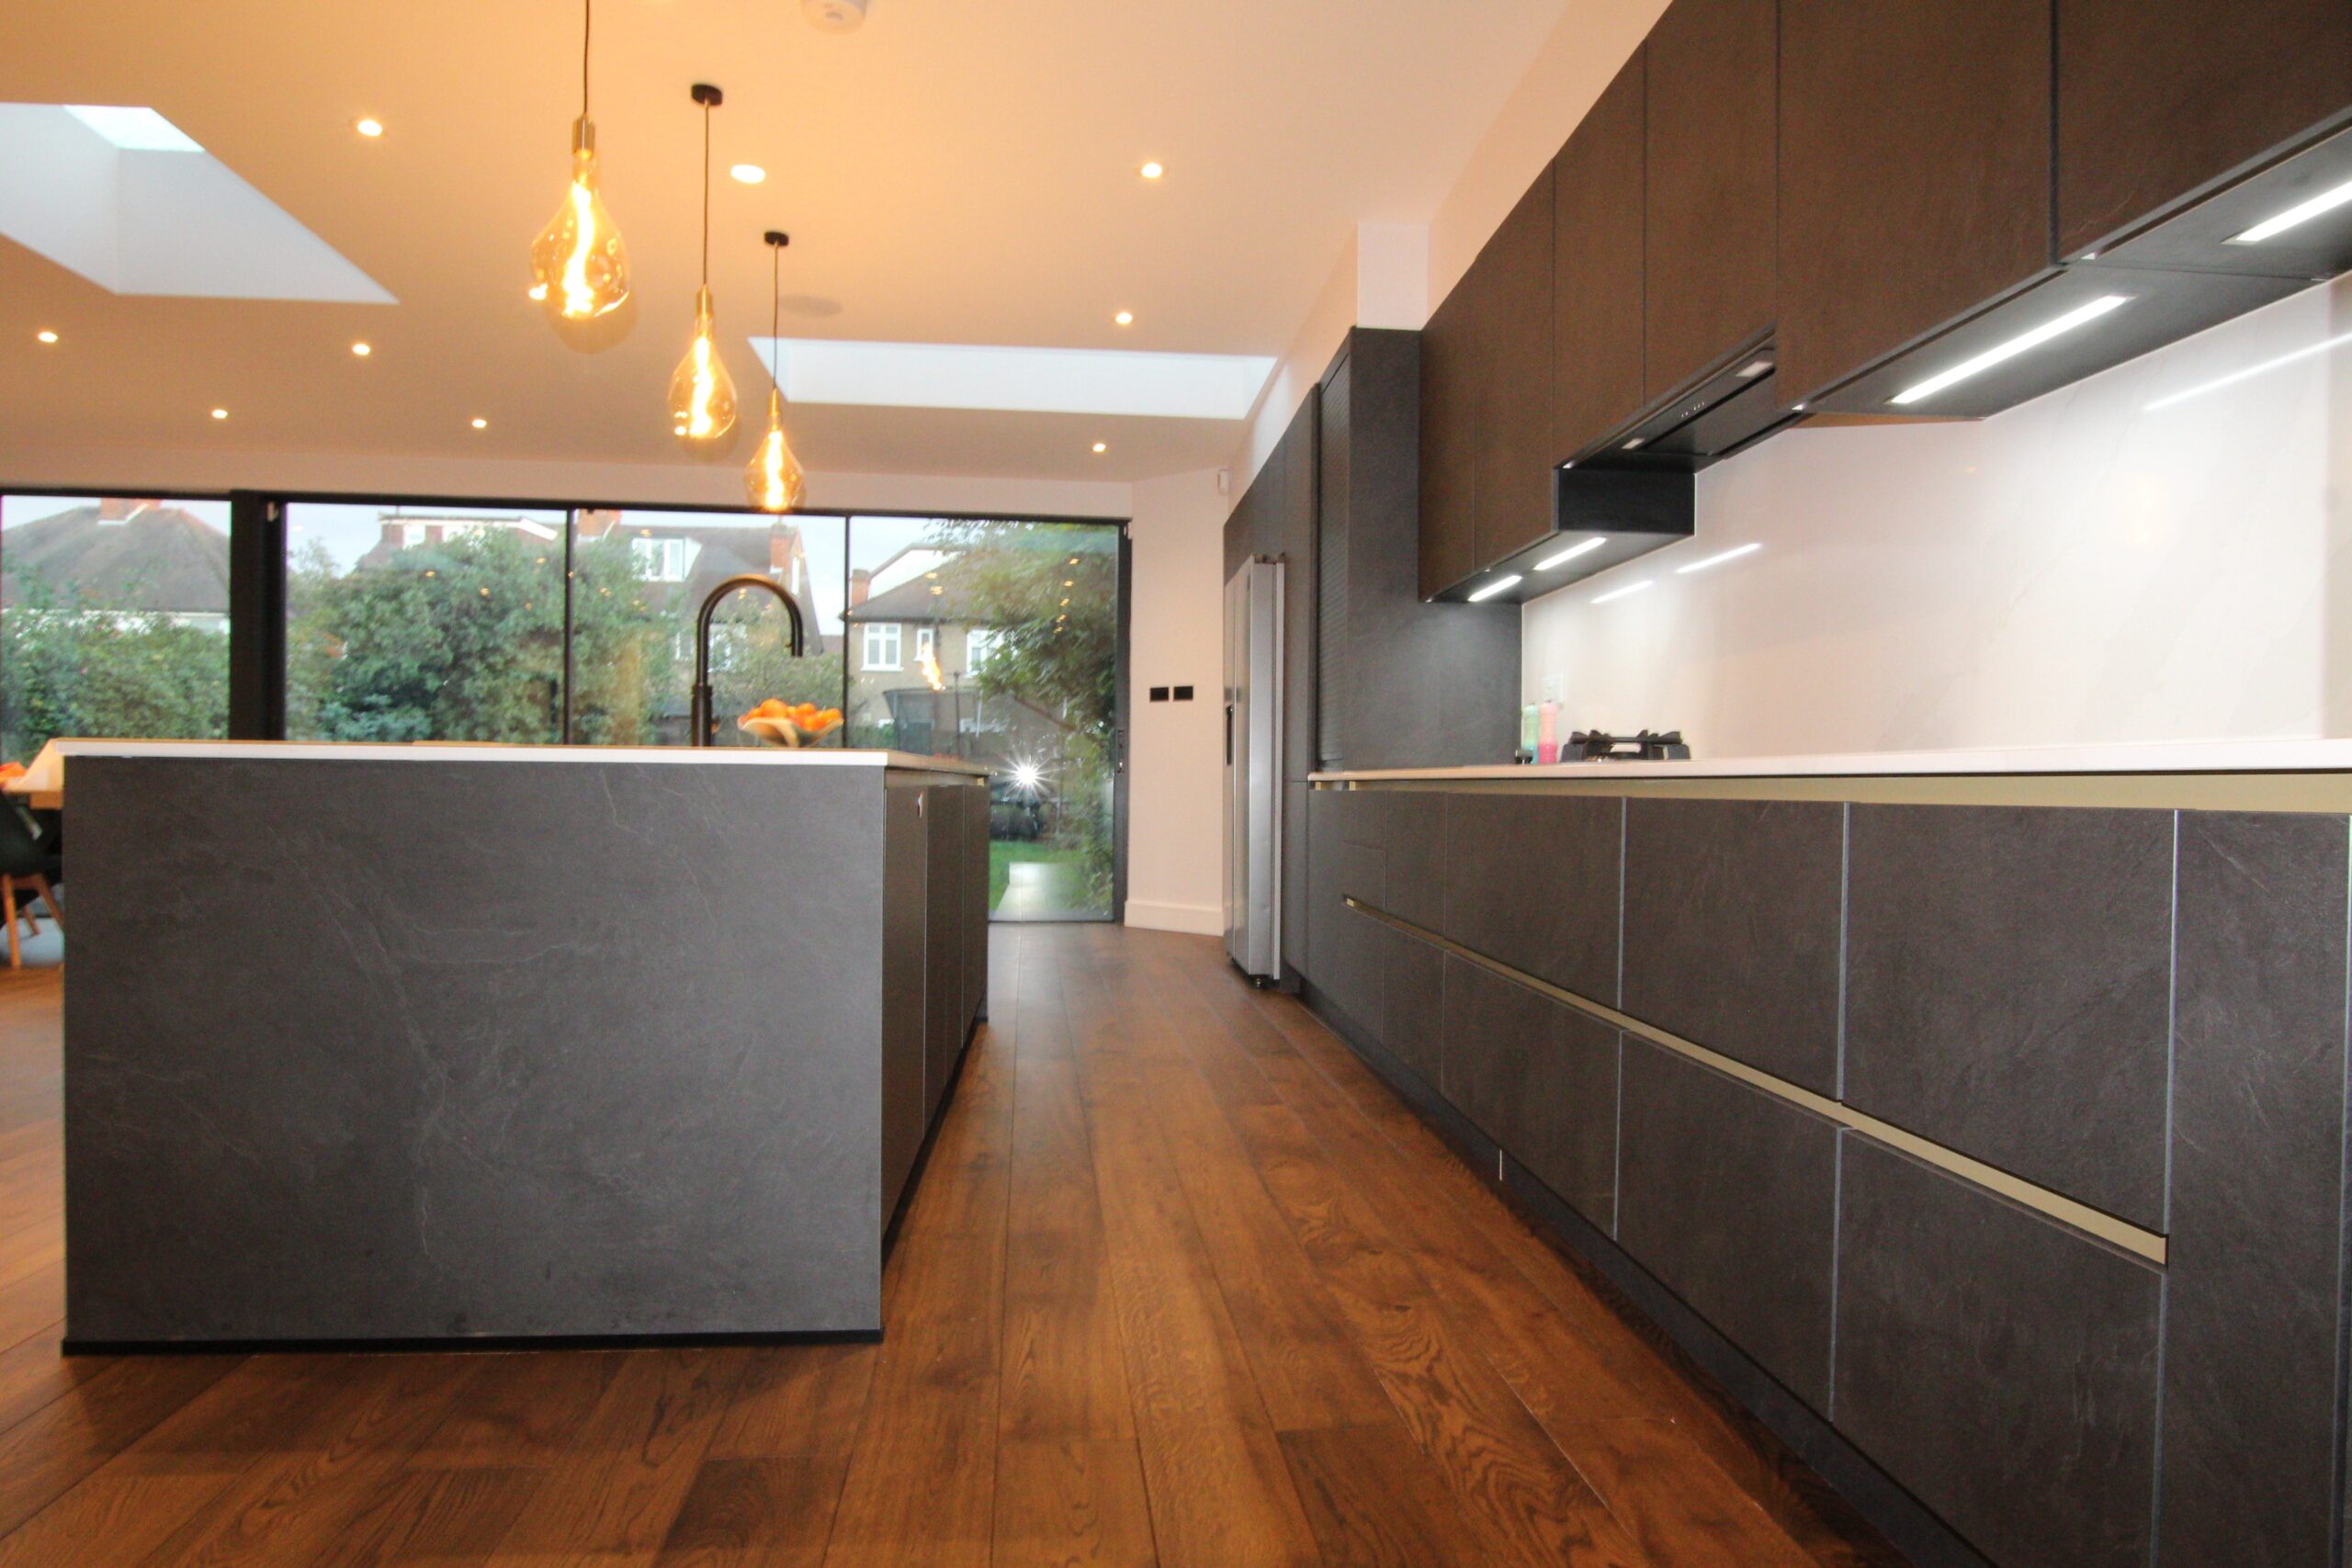 N3 Finchley Recent project German kitchen